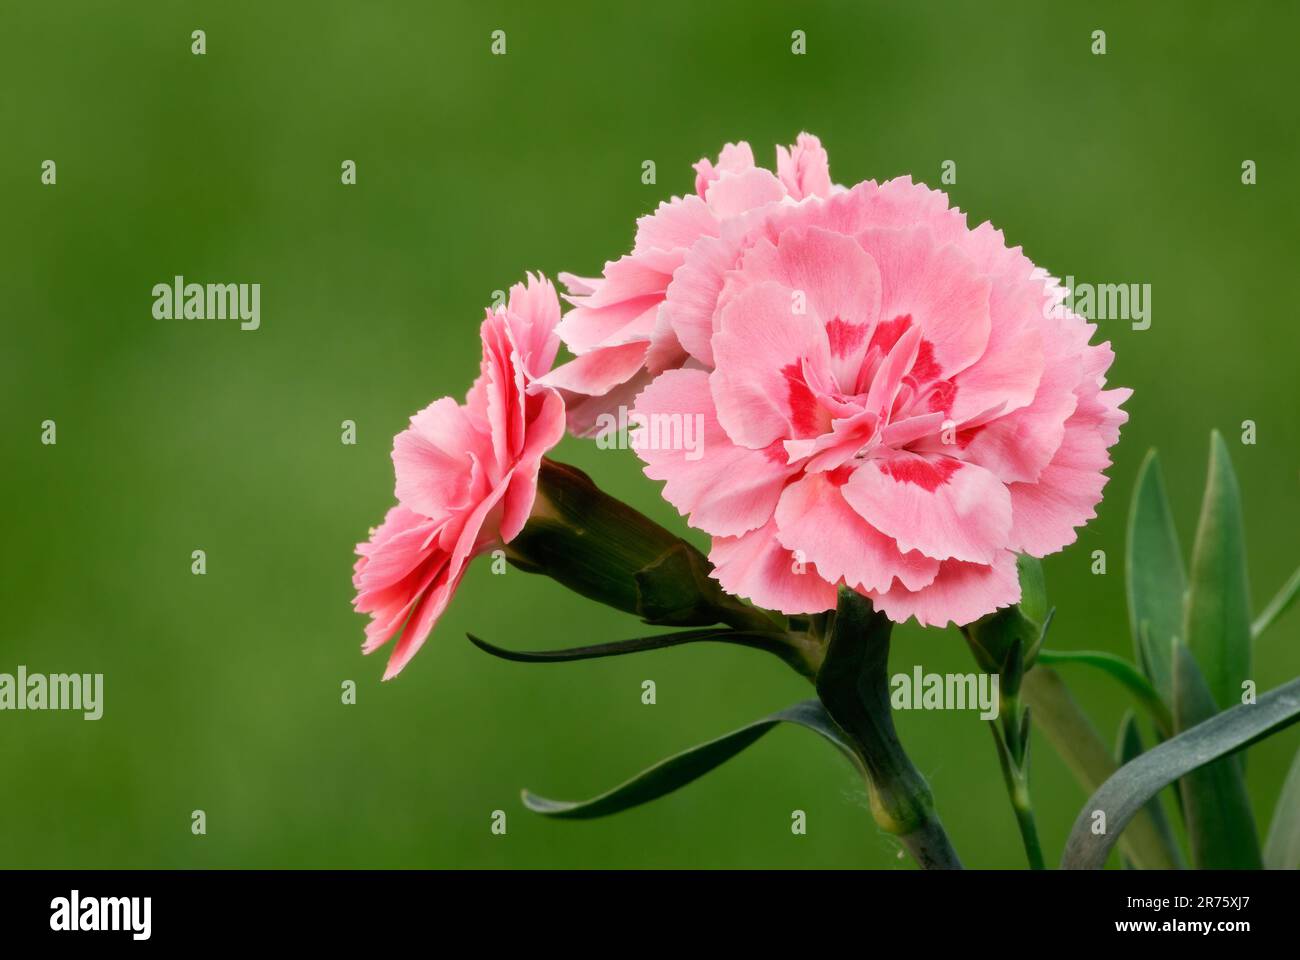 Carnation flowers Dianthus caryophyllus, also called grenadine or clove pink Herbaceous plant. Blurred natural green background. Trencin, Slovakia Stock Photo